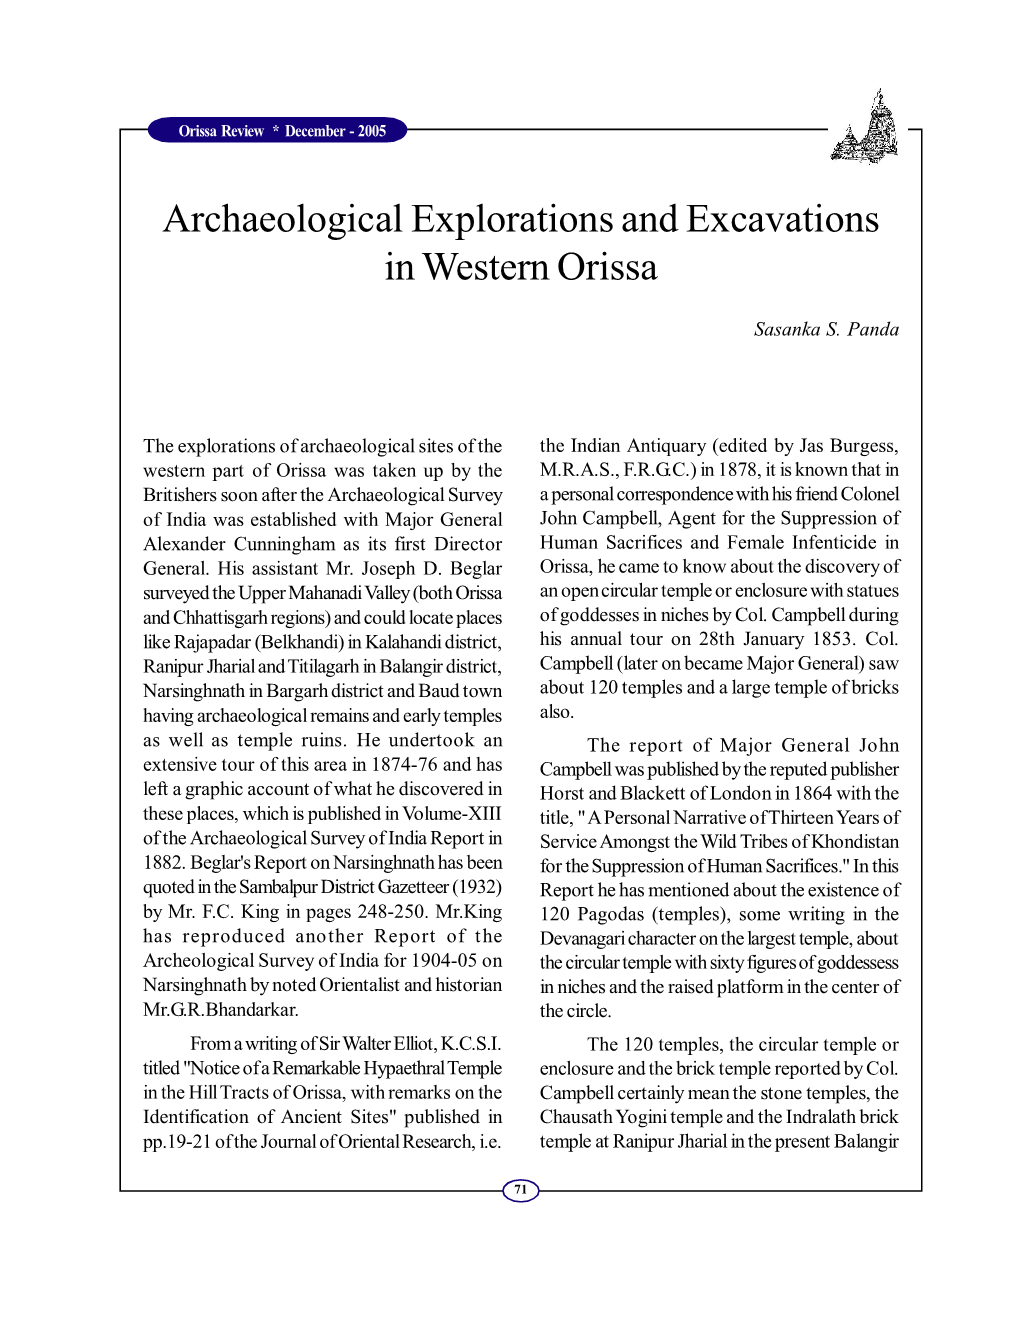 Archaeological Explorations and Excavations in Western Orissa